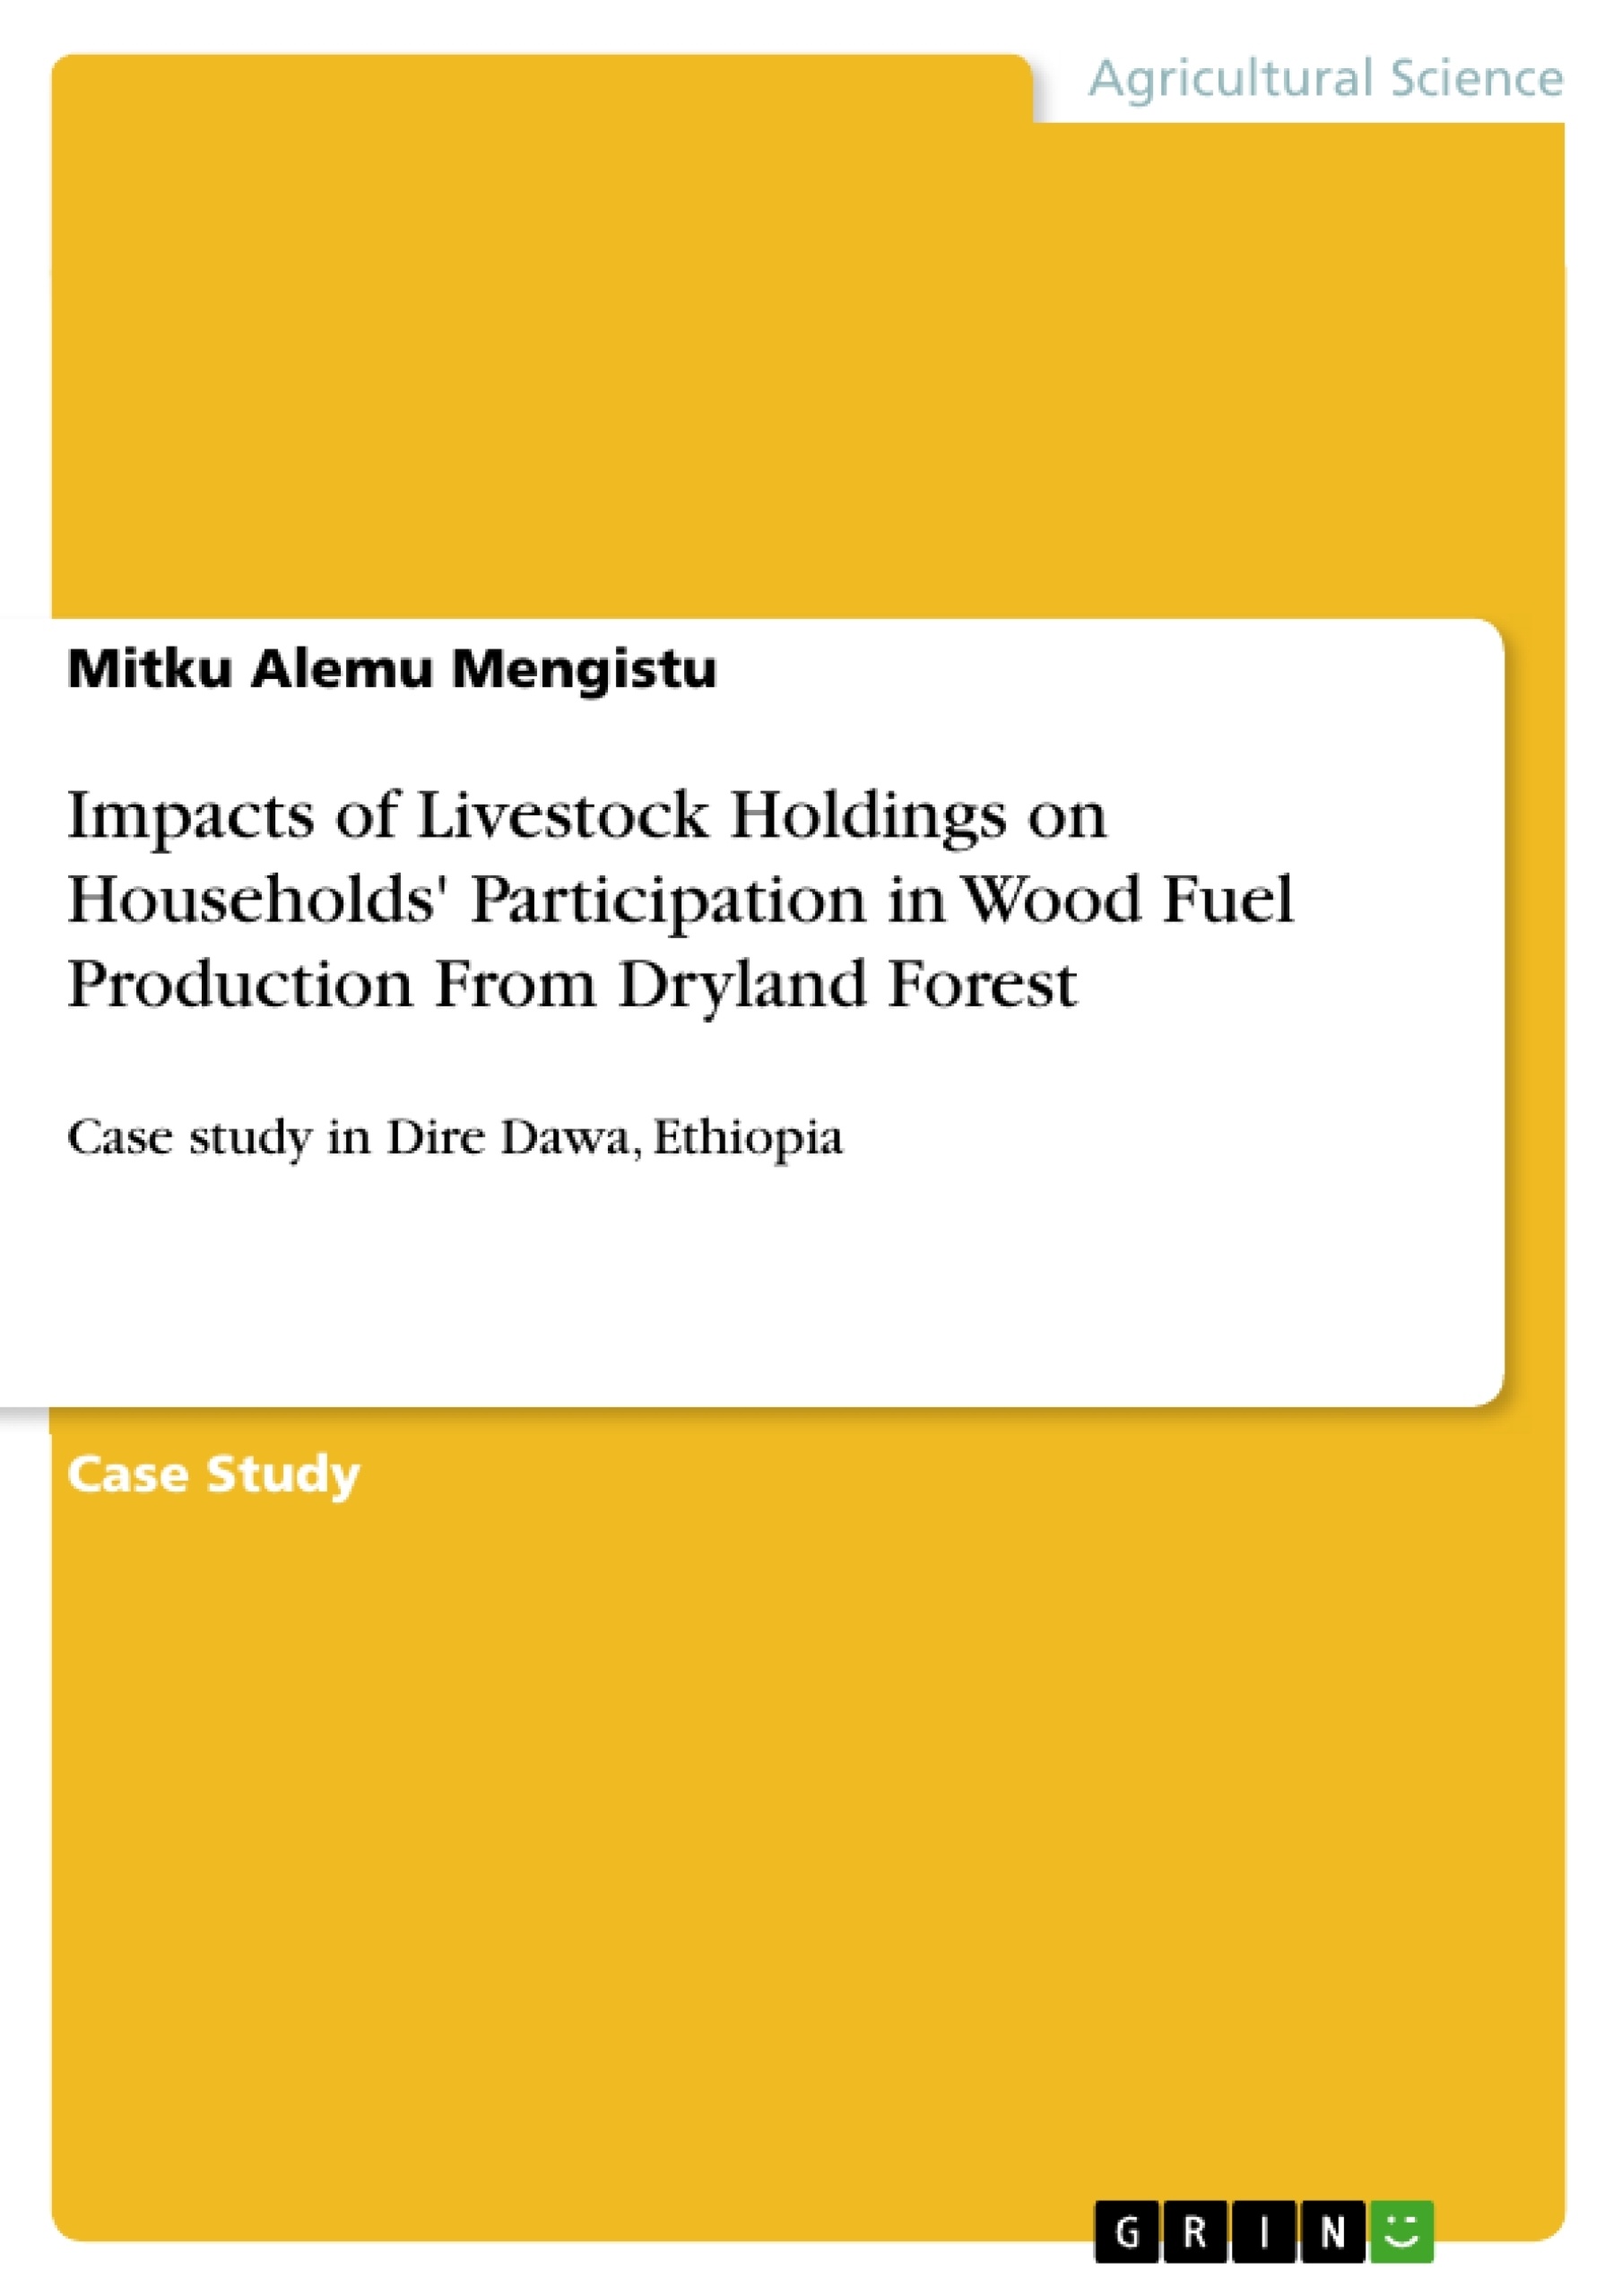 Título: Impacts of Livestock Holdings on Households' Participation in Wood Fuel Production From Dryland Forest